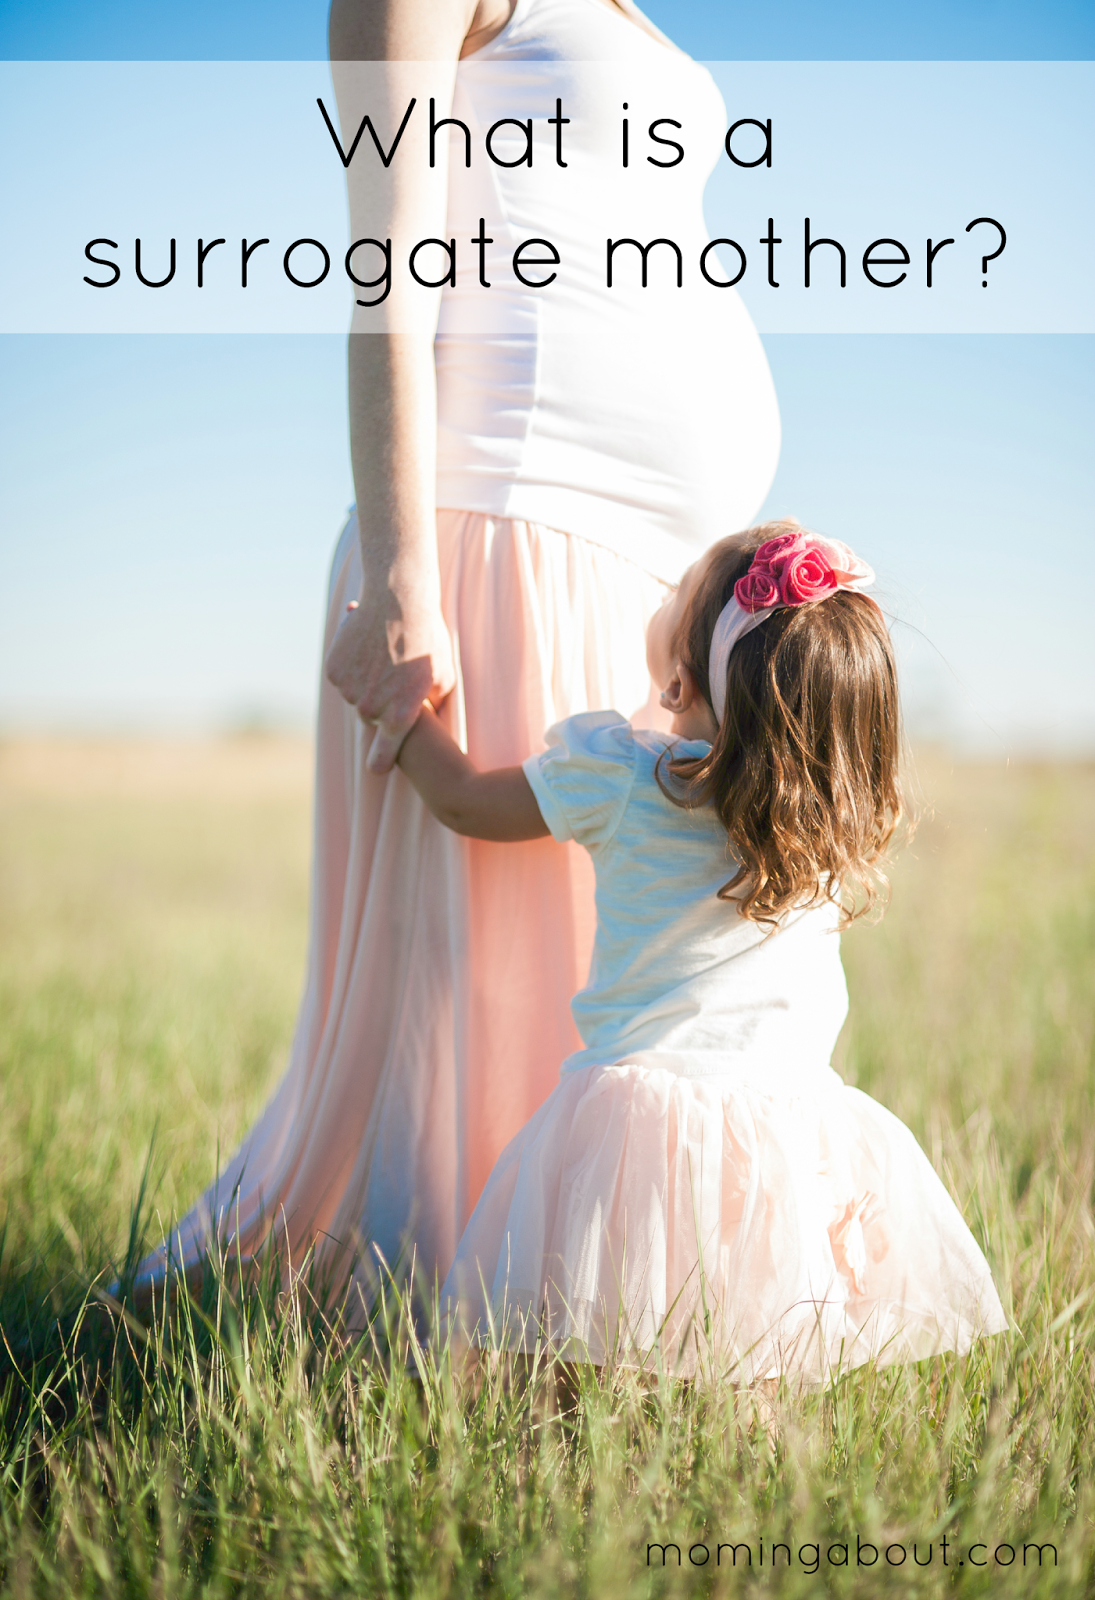 What is a surrogate mother?